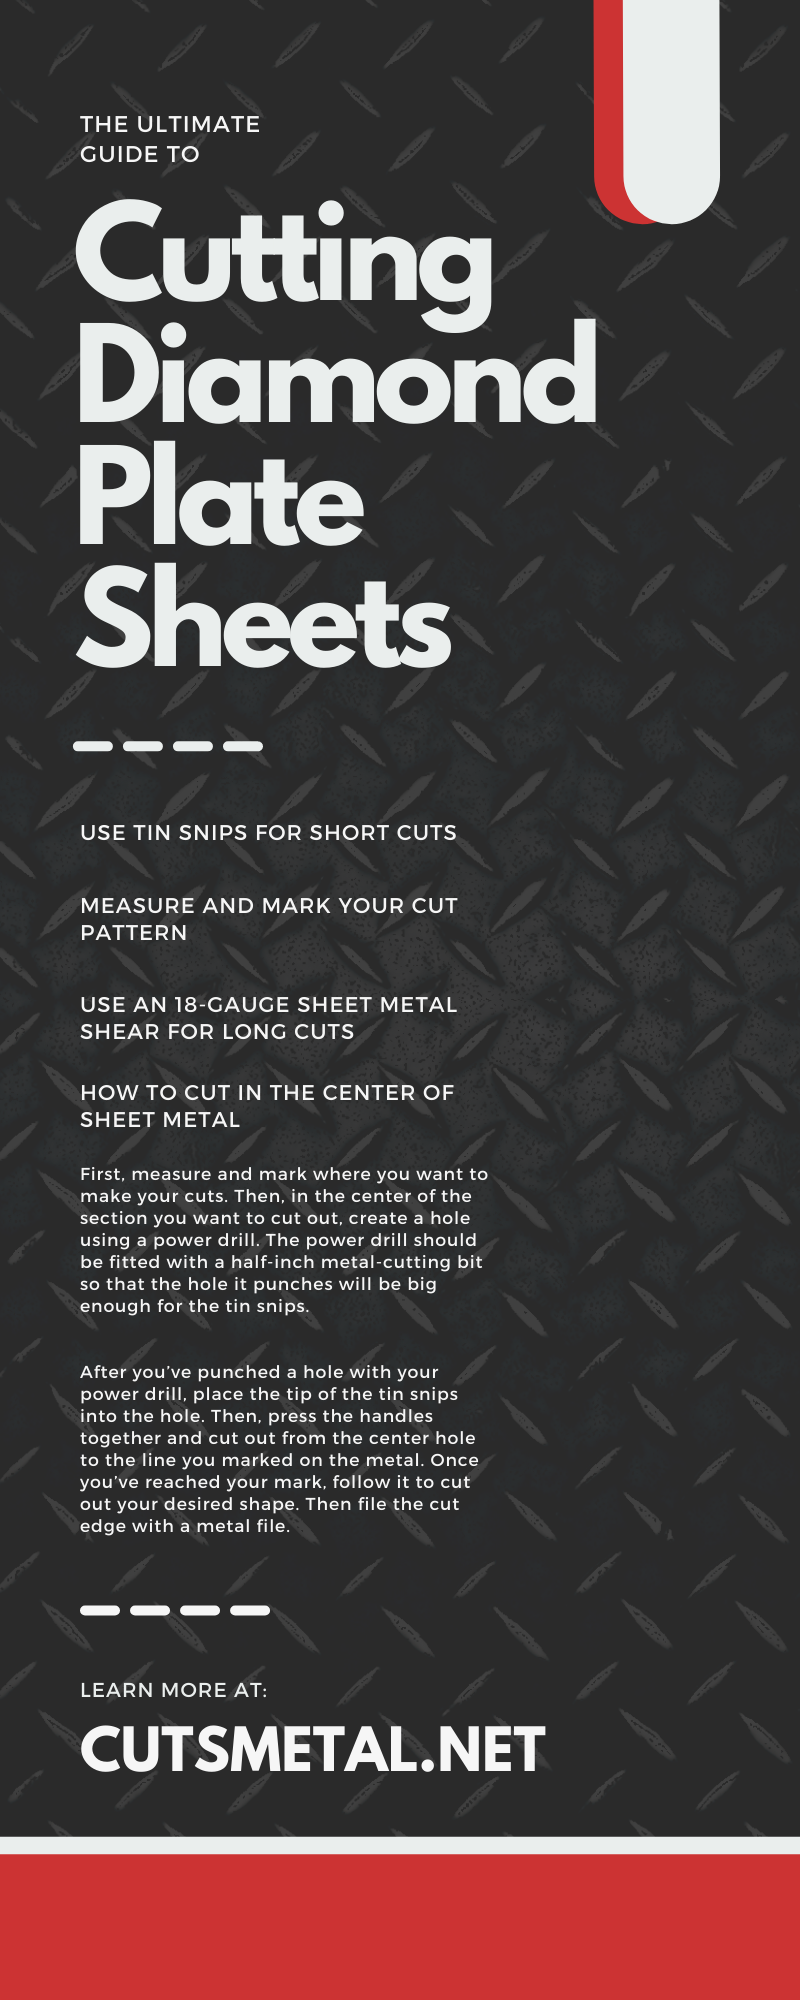 The Ultimate Guide to Cutting Diamond Plate Sheets